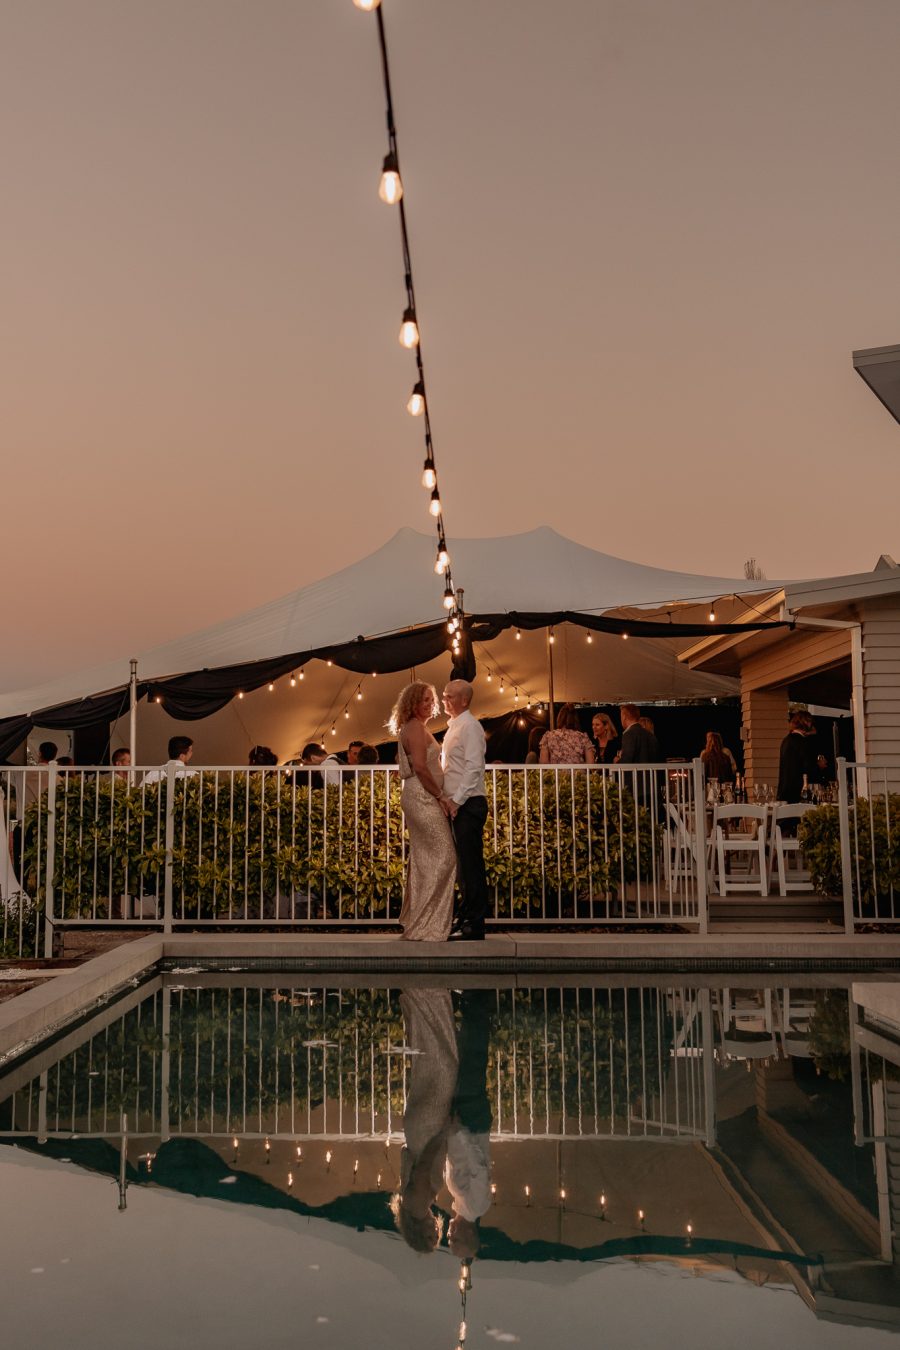 wedding photo by pool at sunset with marquee and celebration lights